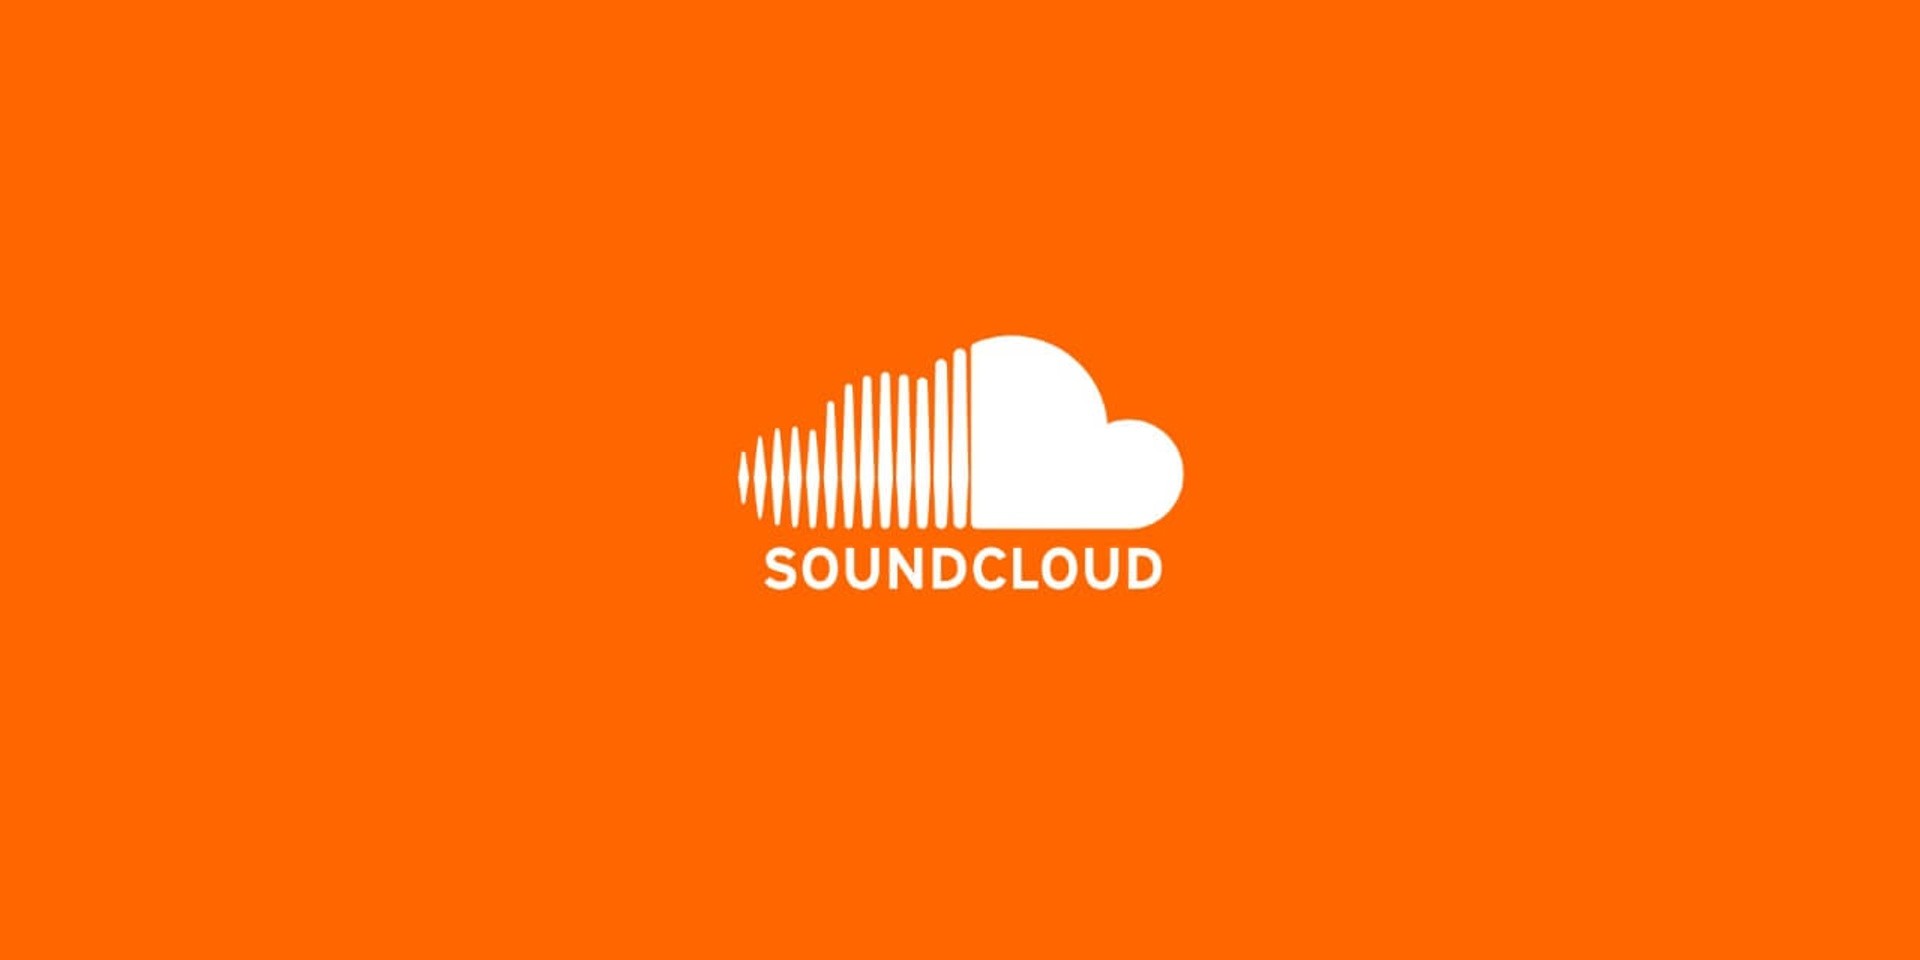 SoundCloud is officially saved by US$170 million emergency funding